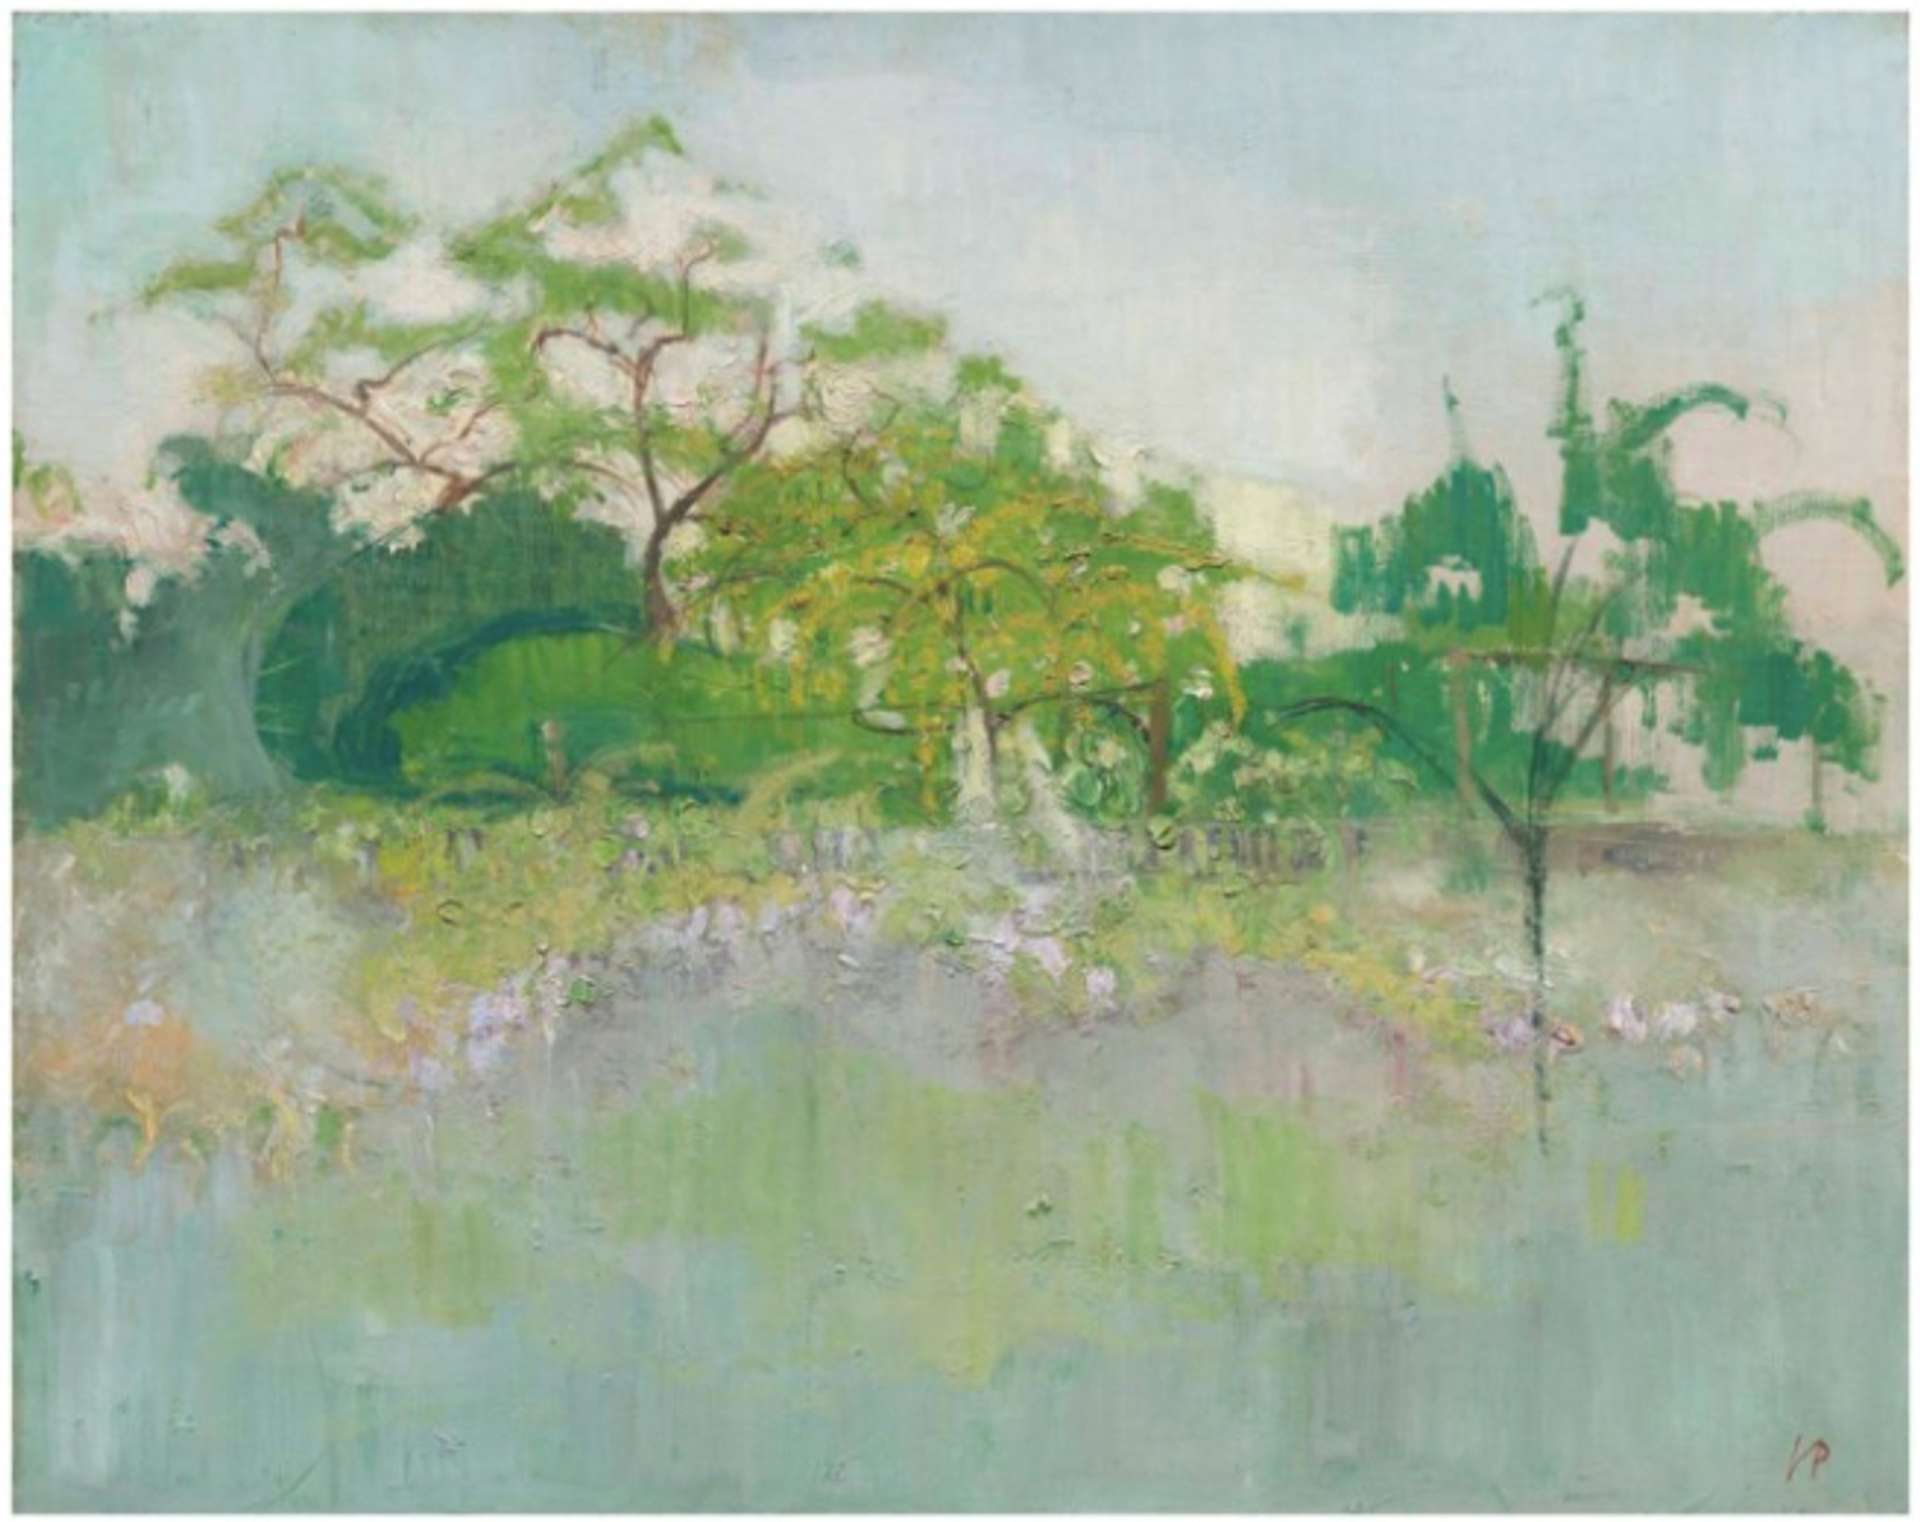 A landscape painting of a river is portrayed in a pale blue hue, with the water reflecting the surrounding trees in different shades of green. The sky appears lighter blue compared to the water, while the trees along the riverbank display various shades of green.